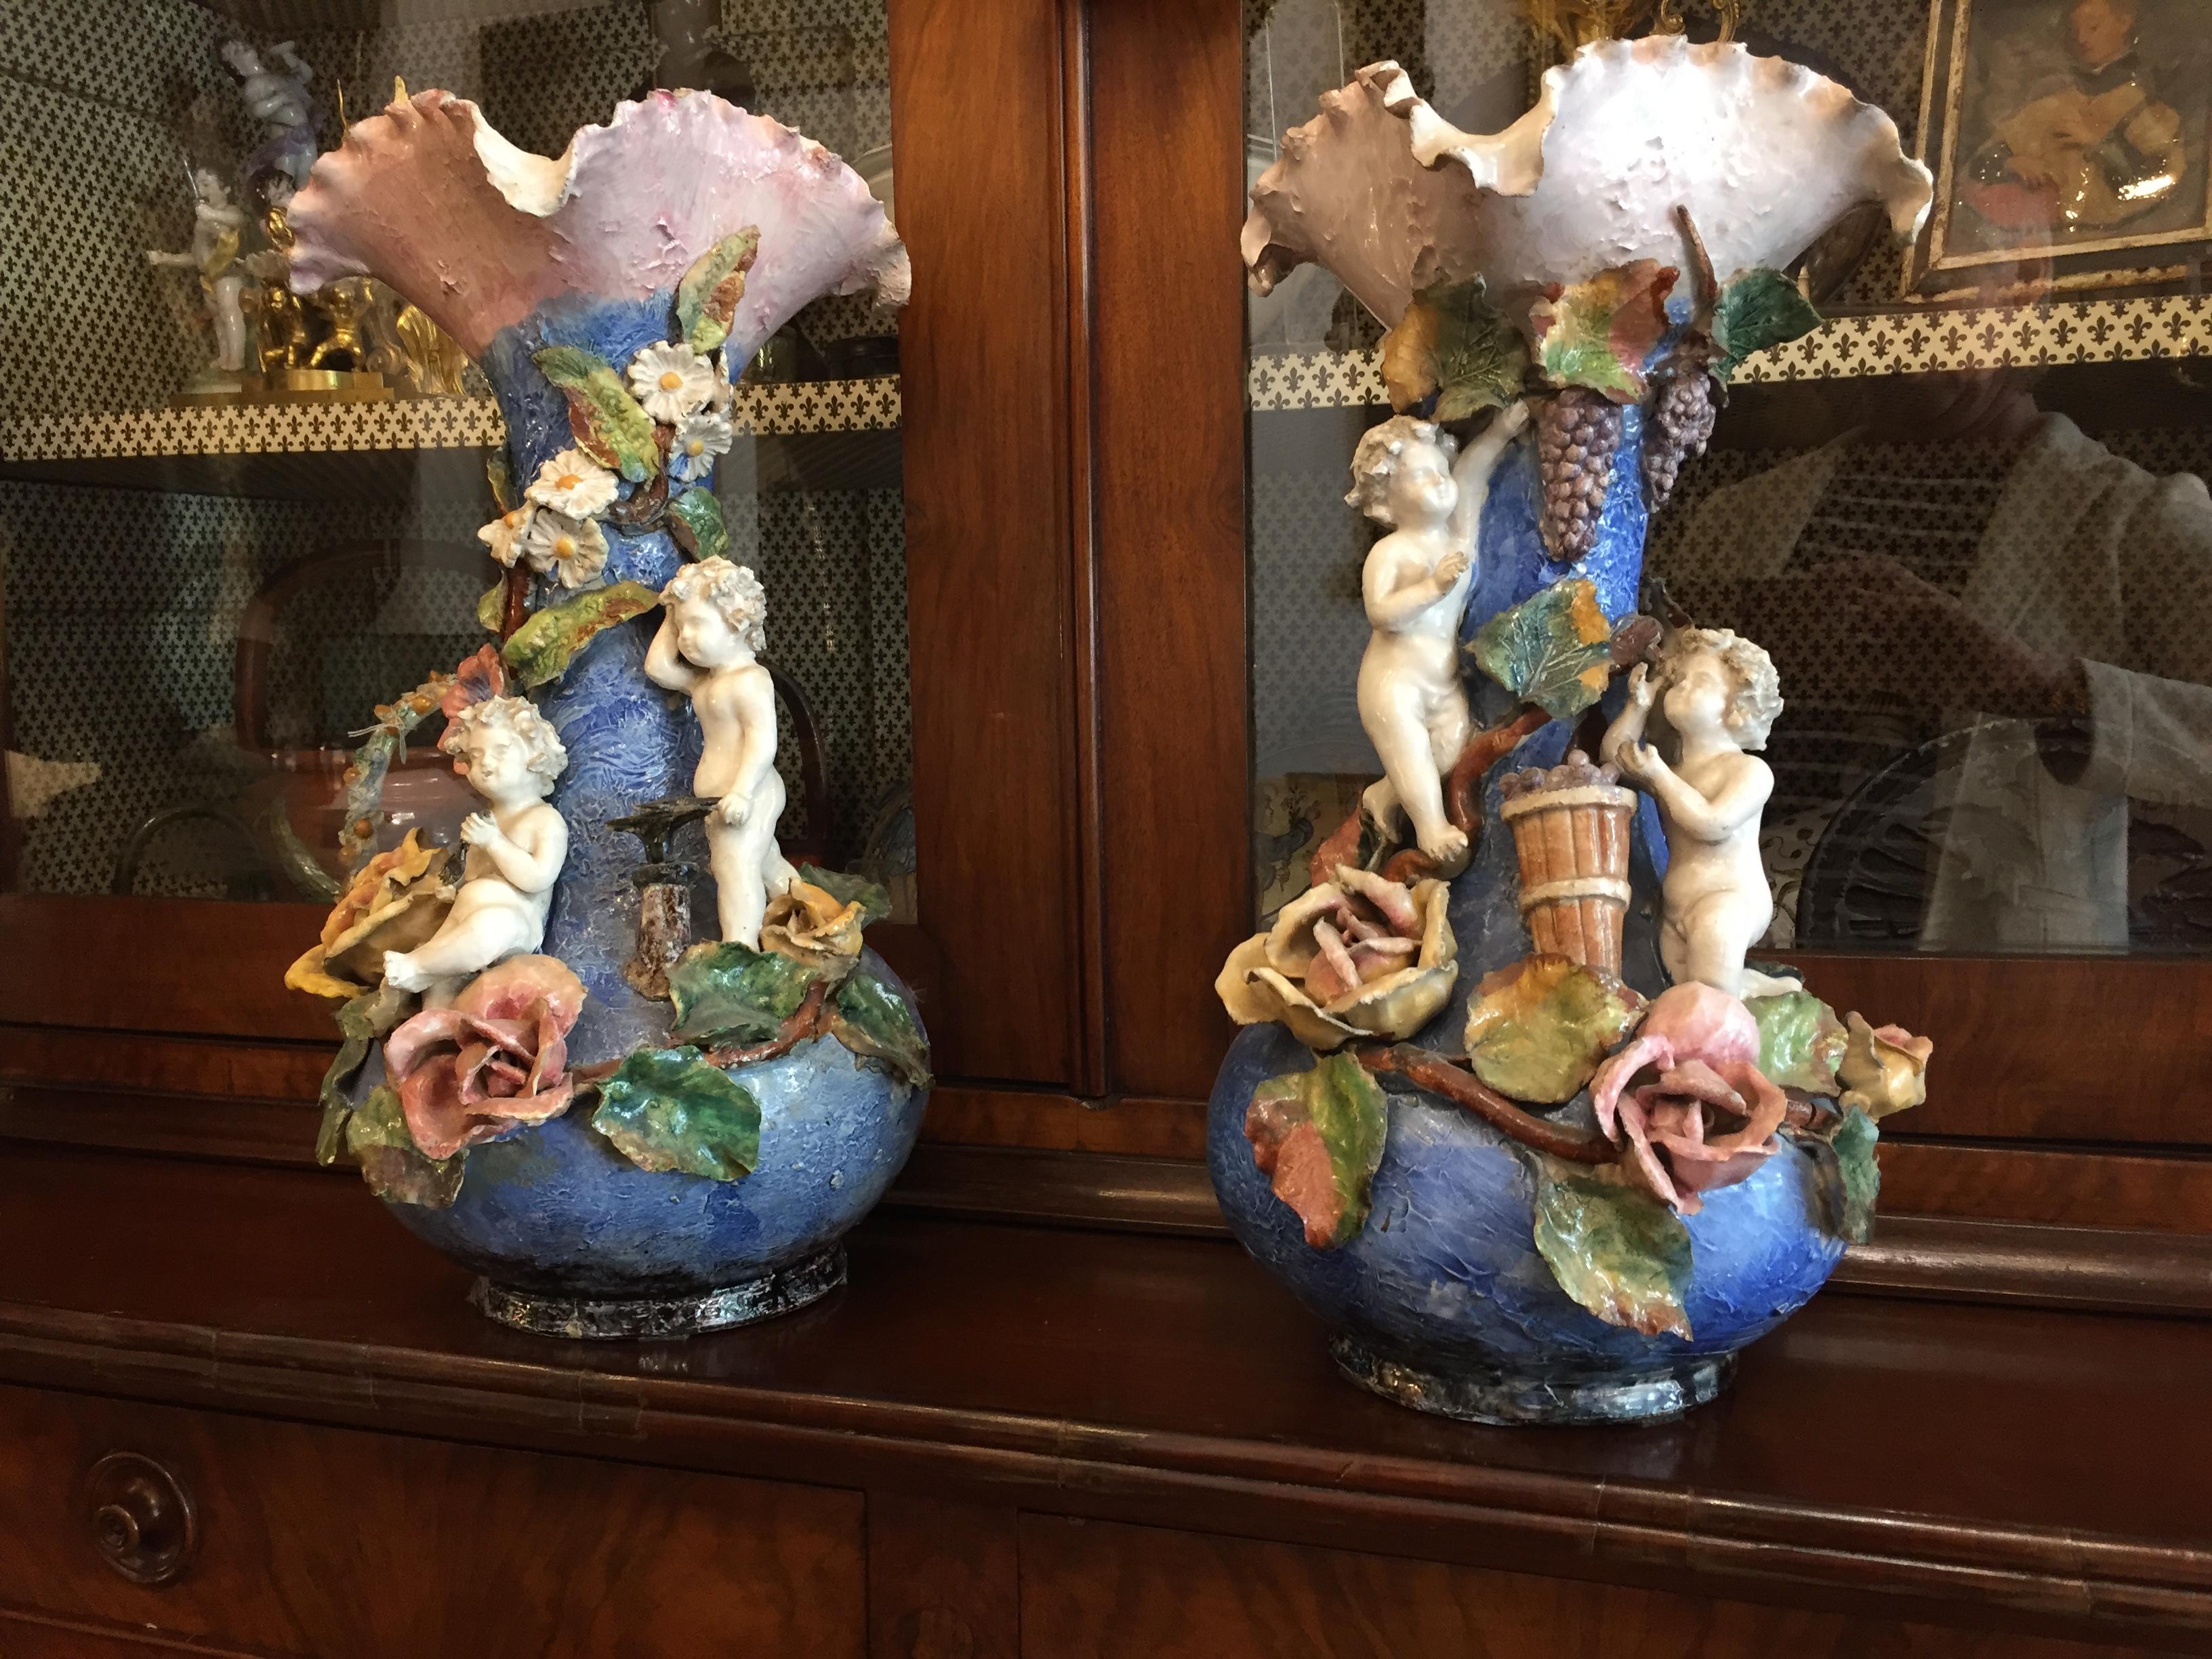 A stunning pair of Italian earthenware glazed majolica celeste round vases, with white / rose jagged and wavy mouth, perfect for an entry hall table.
Of Piedmontese origin, Piedmonte is the northern Italian region closed to the border with France,